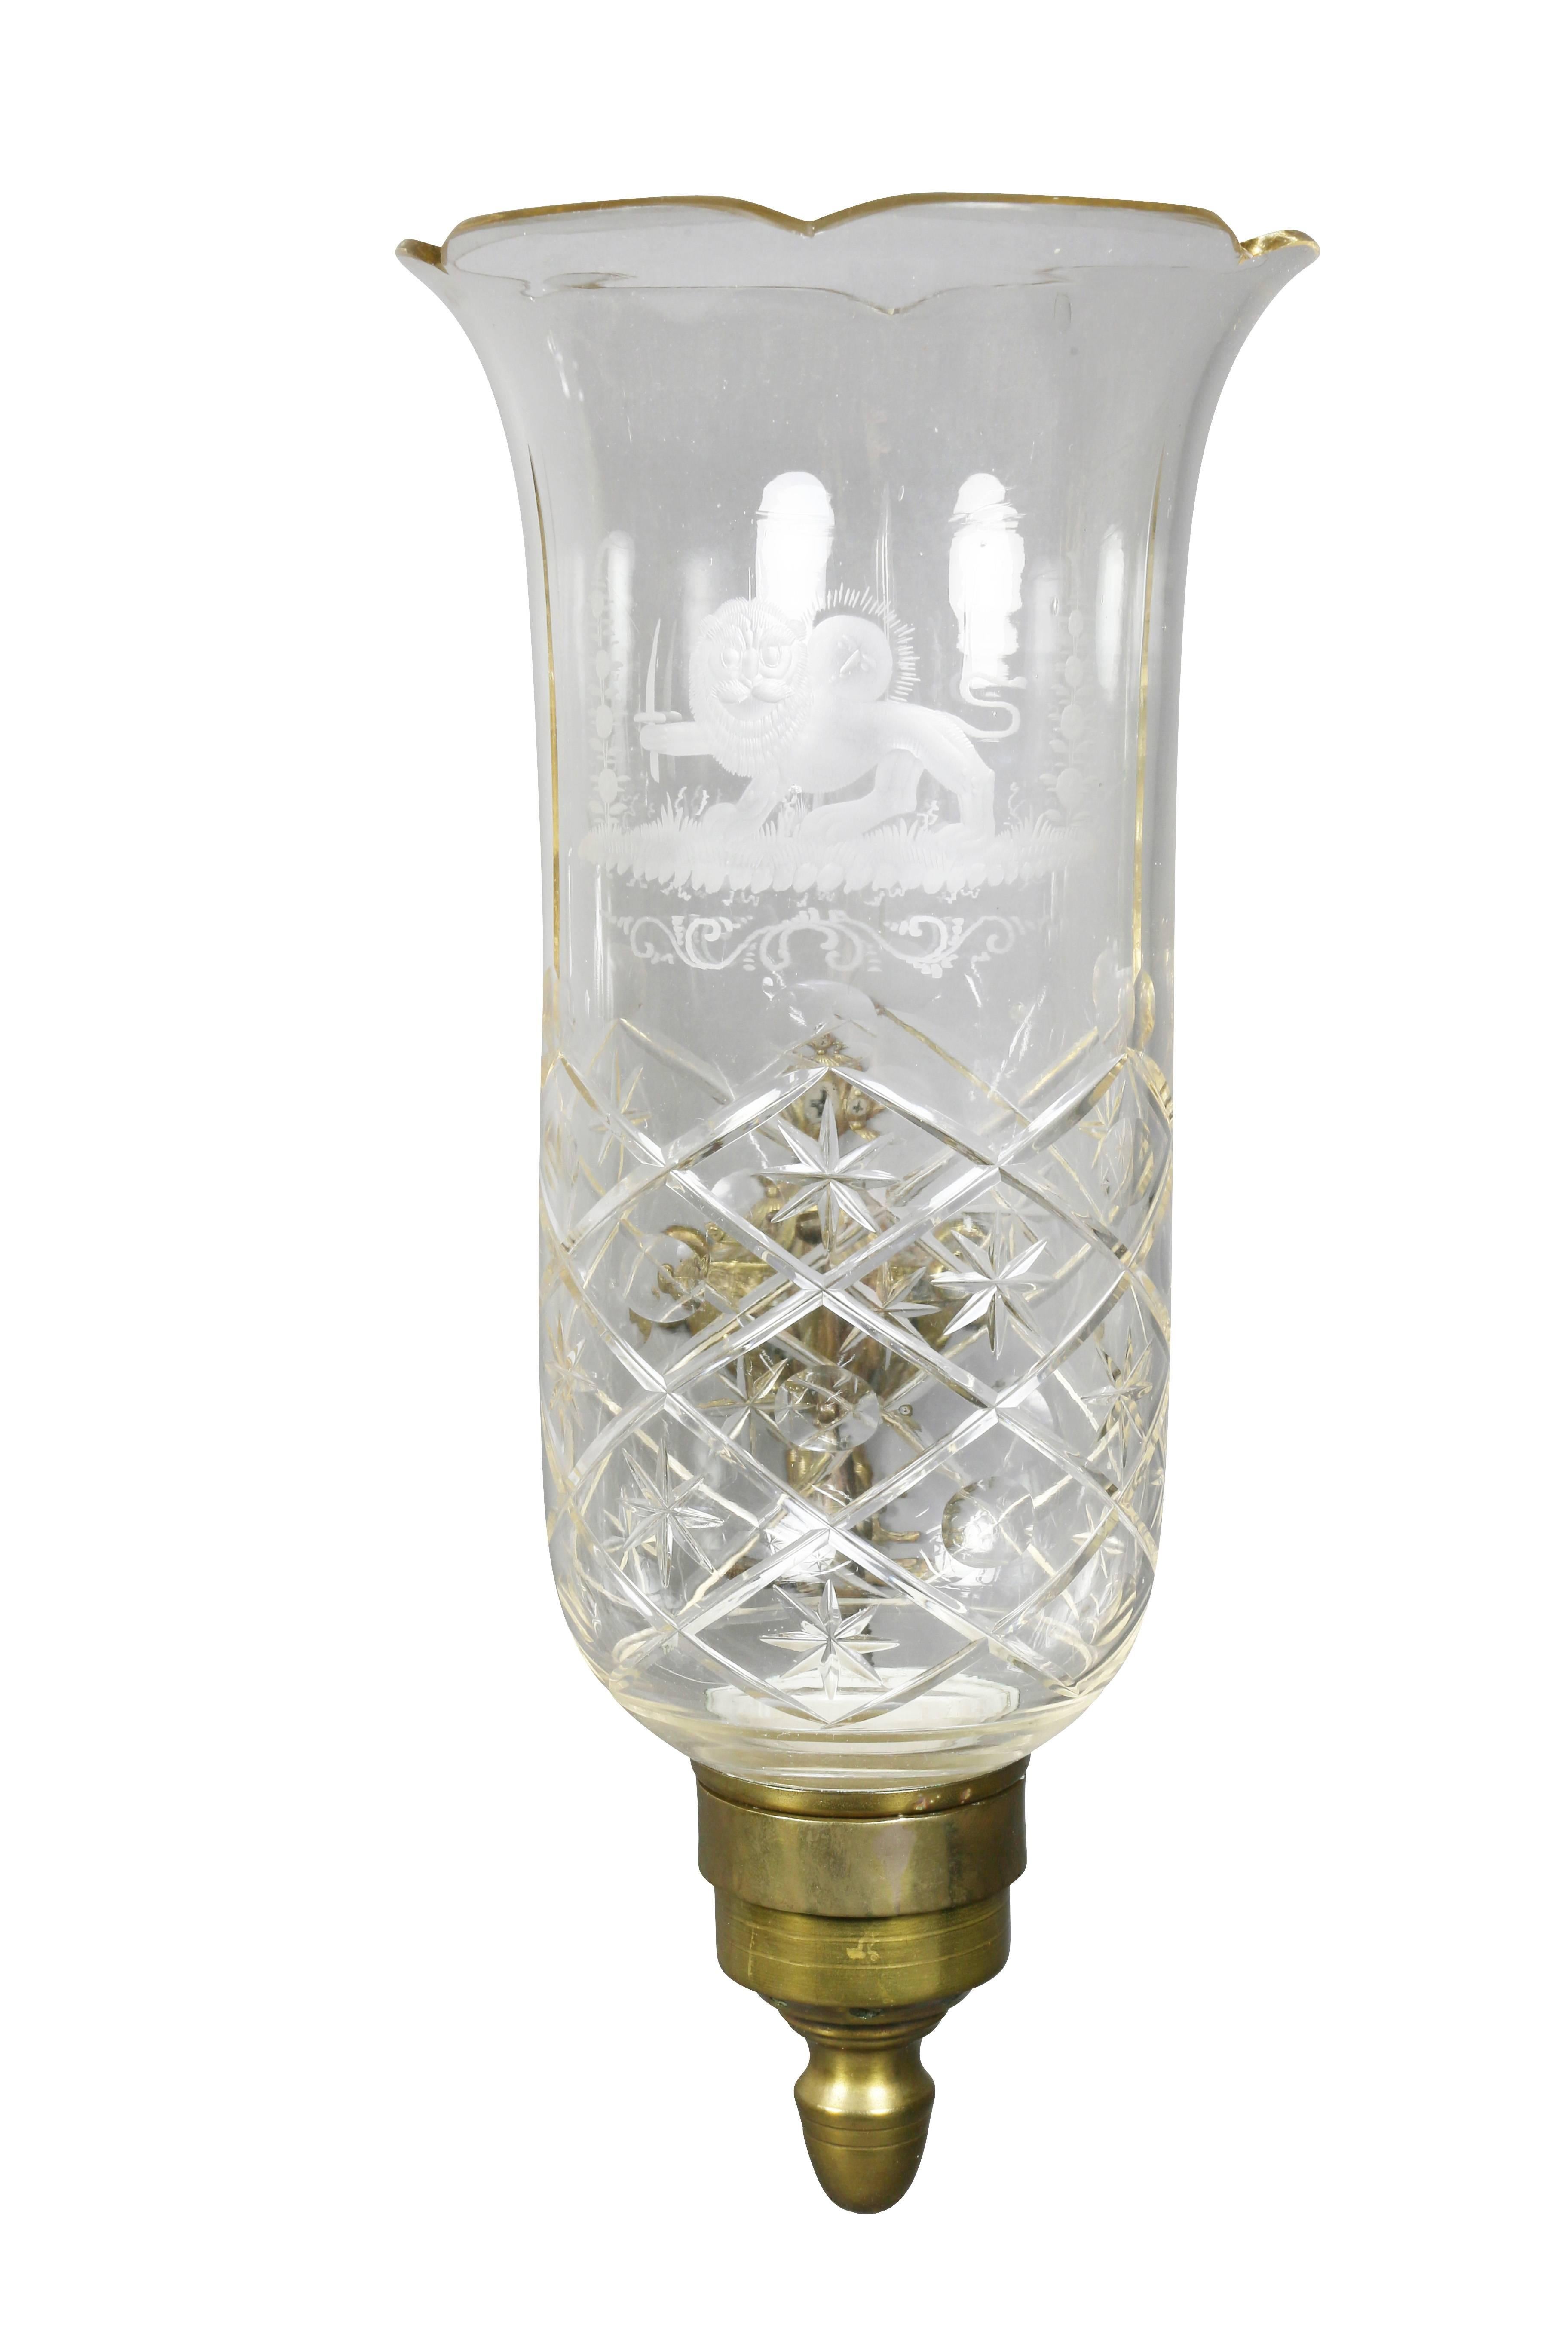 Great Britain (UK) Pair of Regency Brass, Etched and Cut-Glass Hurricane Wall Sconces